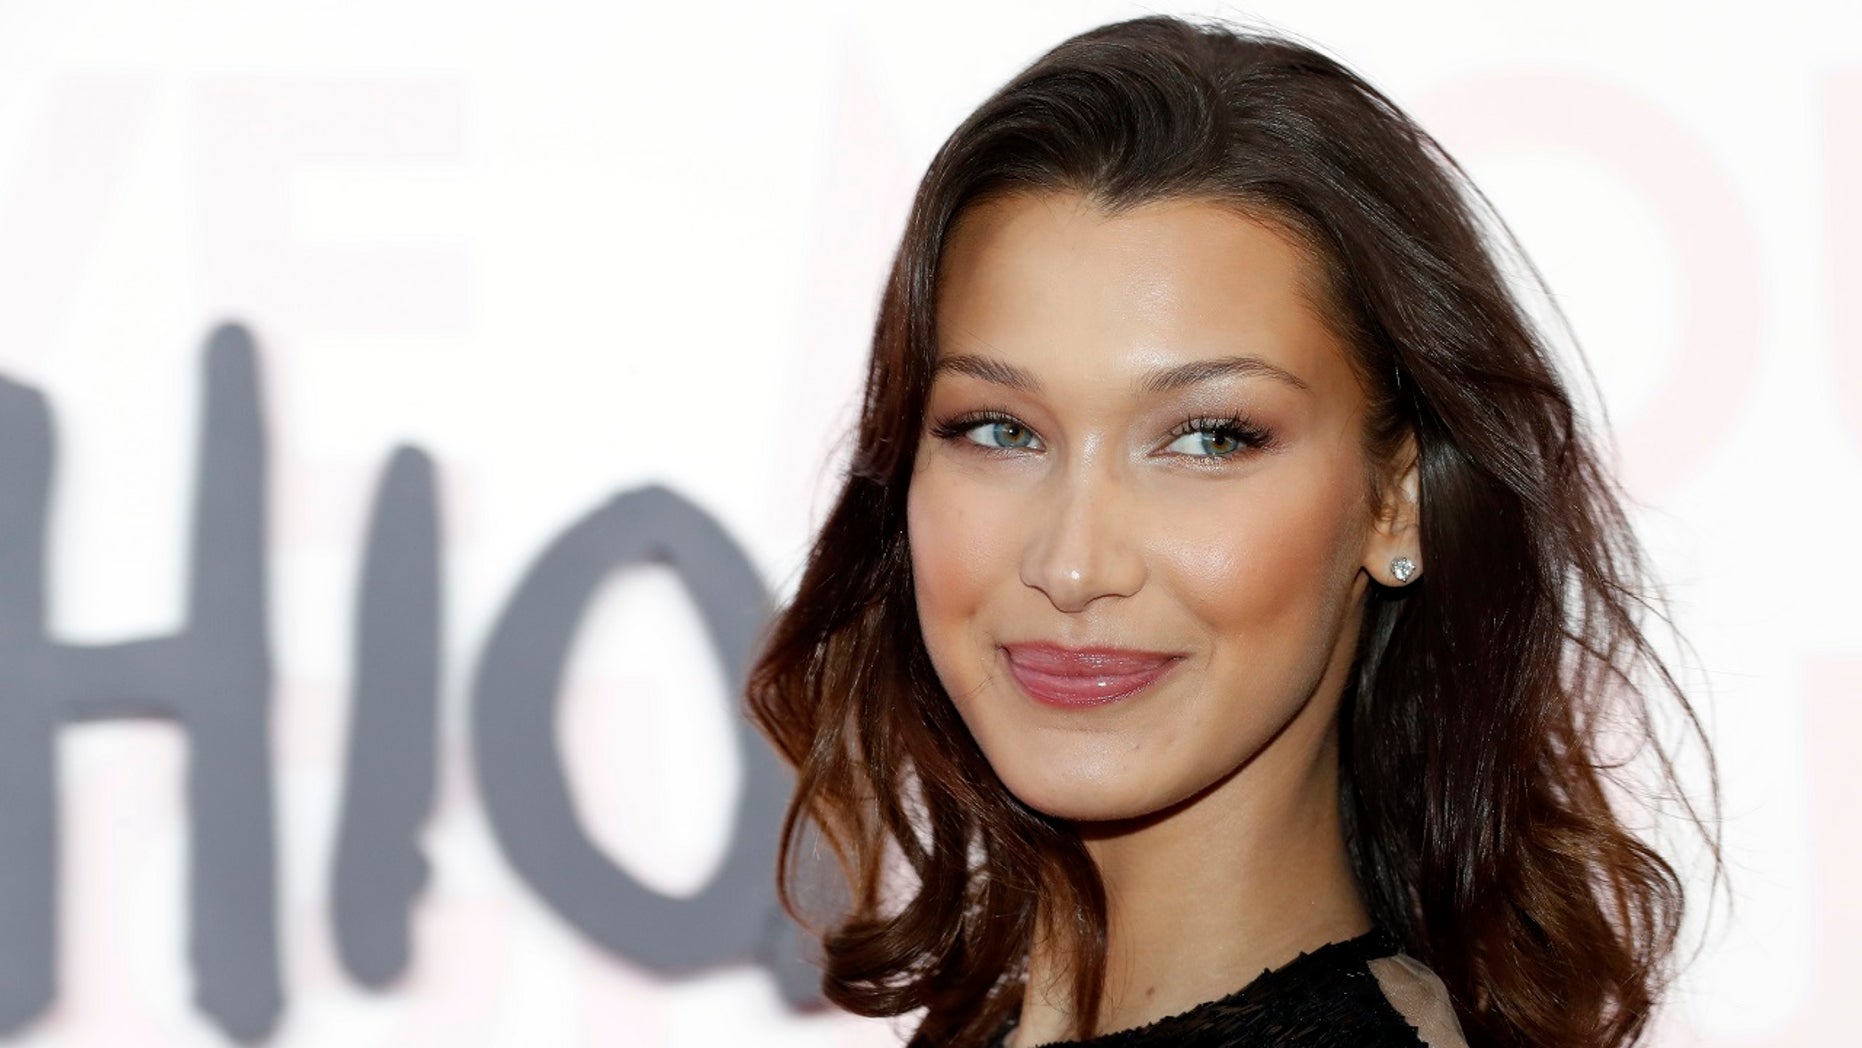 Bella Hadid: Injustice in Muslim countries deserves same level of outrage as Ukraine